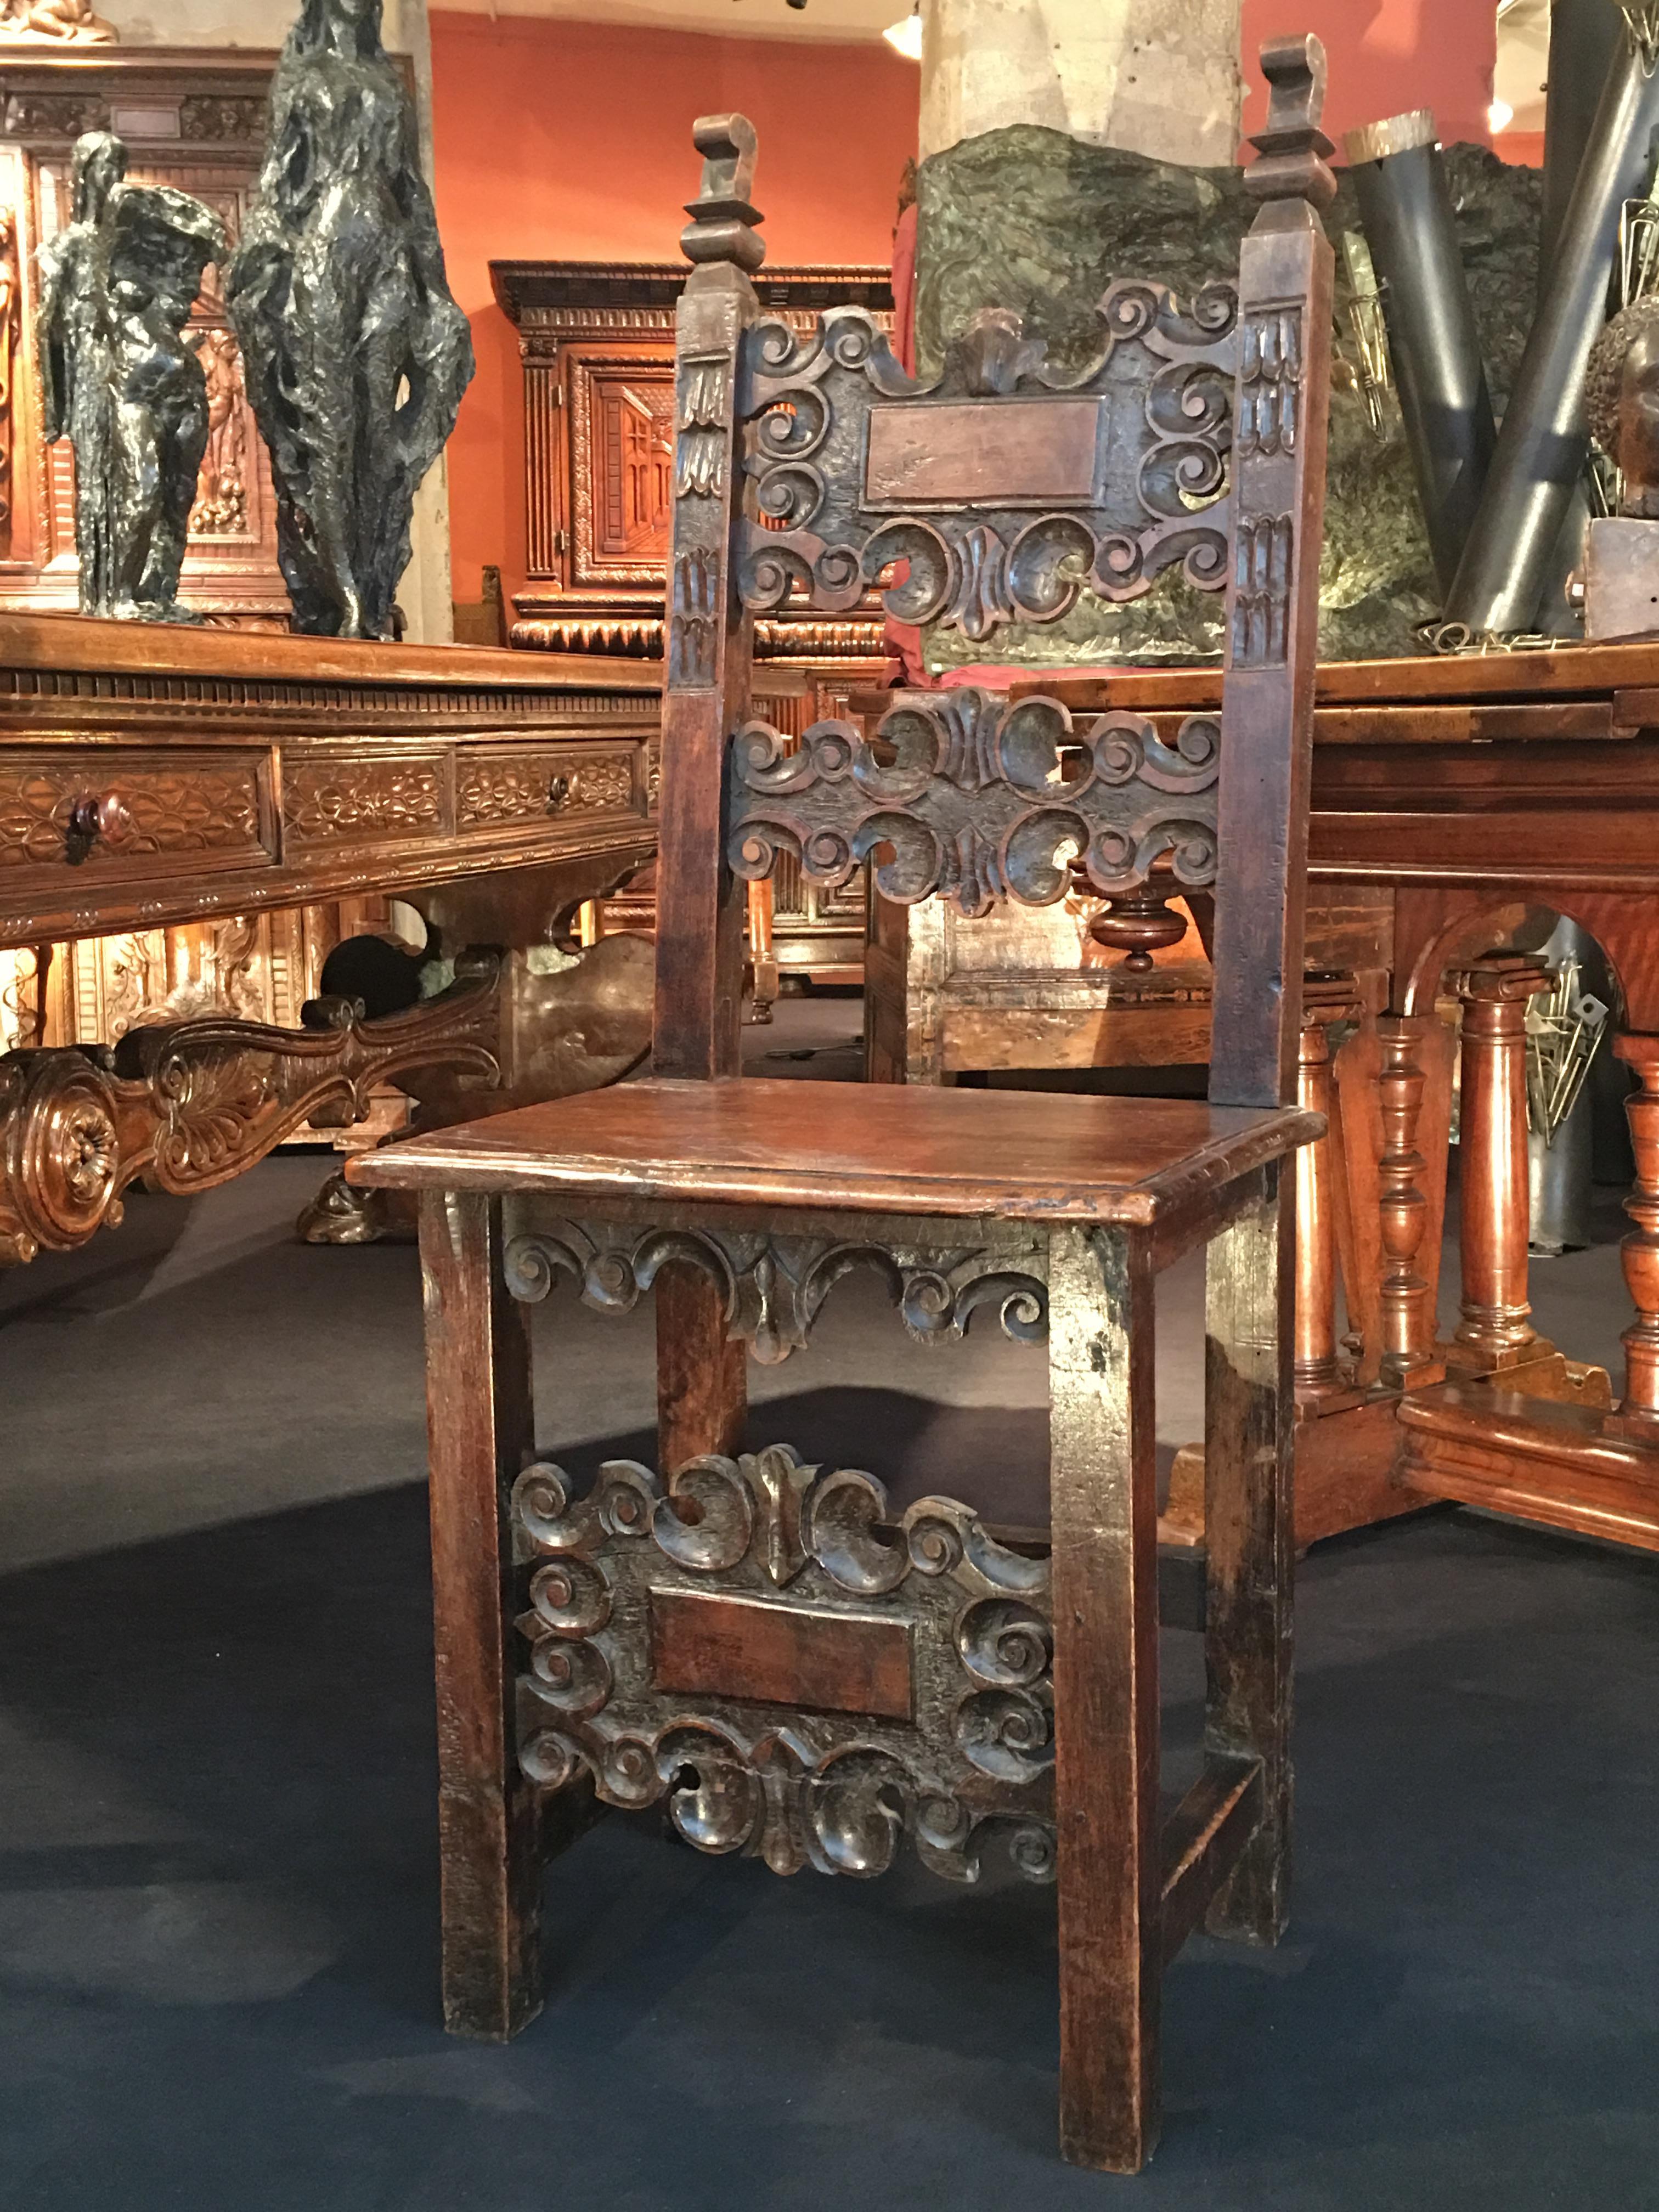 Origin: Italy, Tuscany
Period: Late 16th century

Measures: Height 122 cm
Seat 49.5 x 36 cm

Walnut wood
Very good condition

High-backed Italian chair with wood marquetry, decorated with scrolls.
 